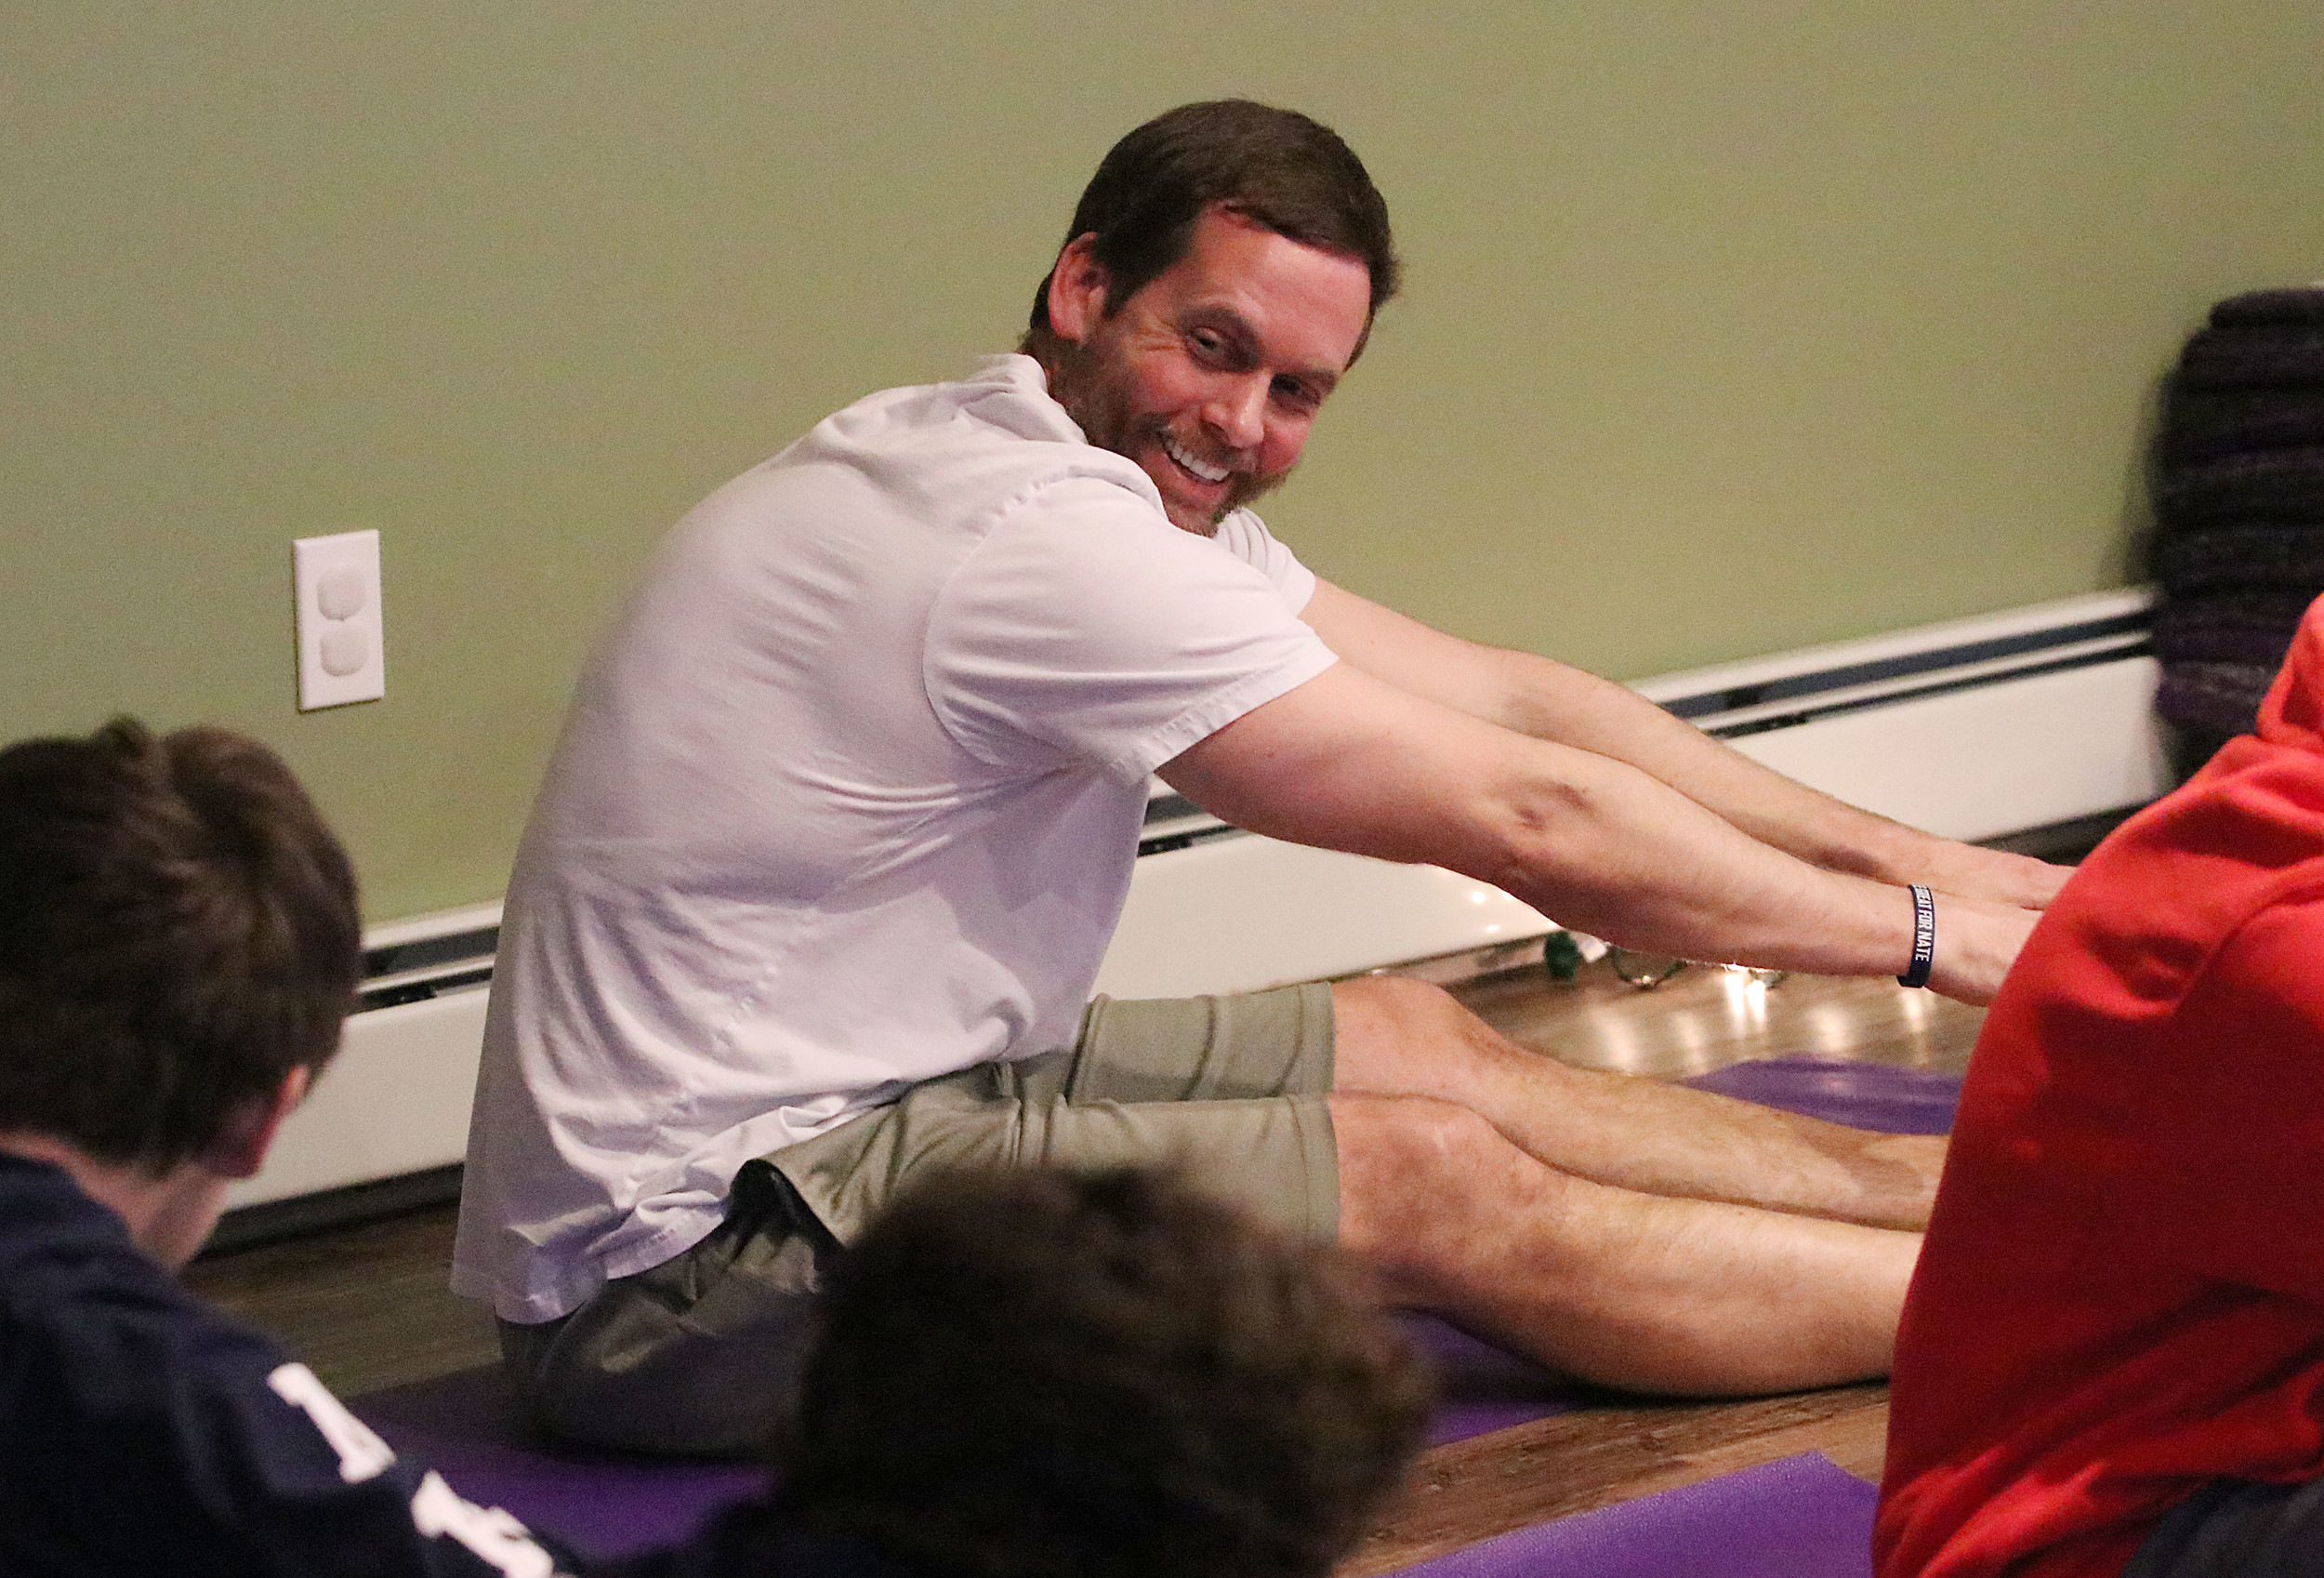 Rick Bruno, father of the late Nathan Bruno, laughs along with Nate’s friends during a yoga and mindfulness class at The Nest at Tenth Gate Yoga Saturday afternoon.